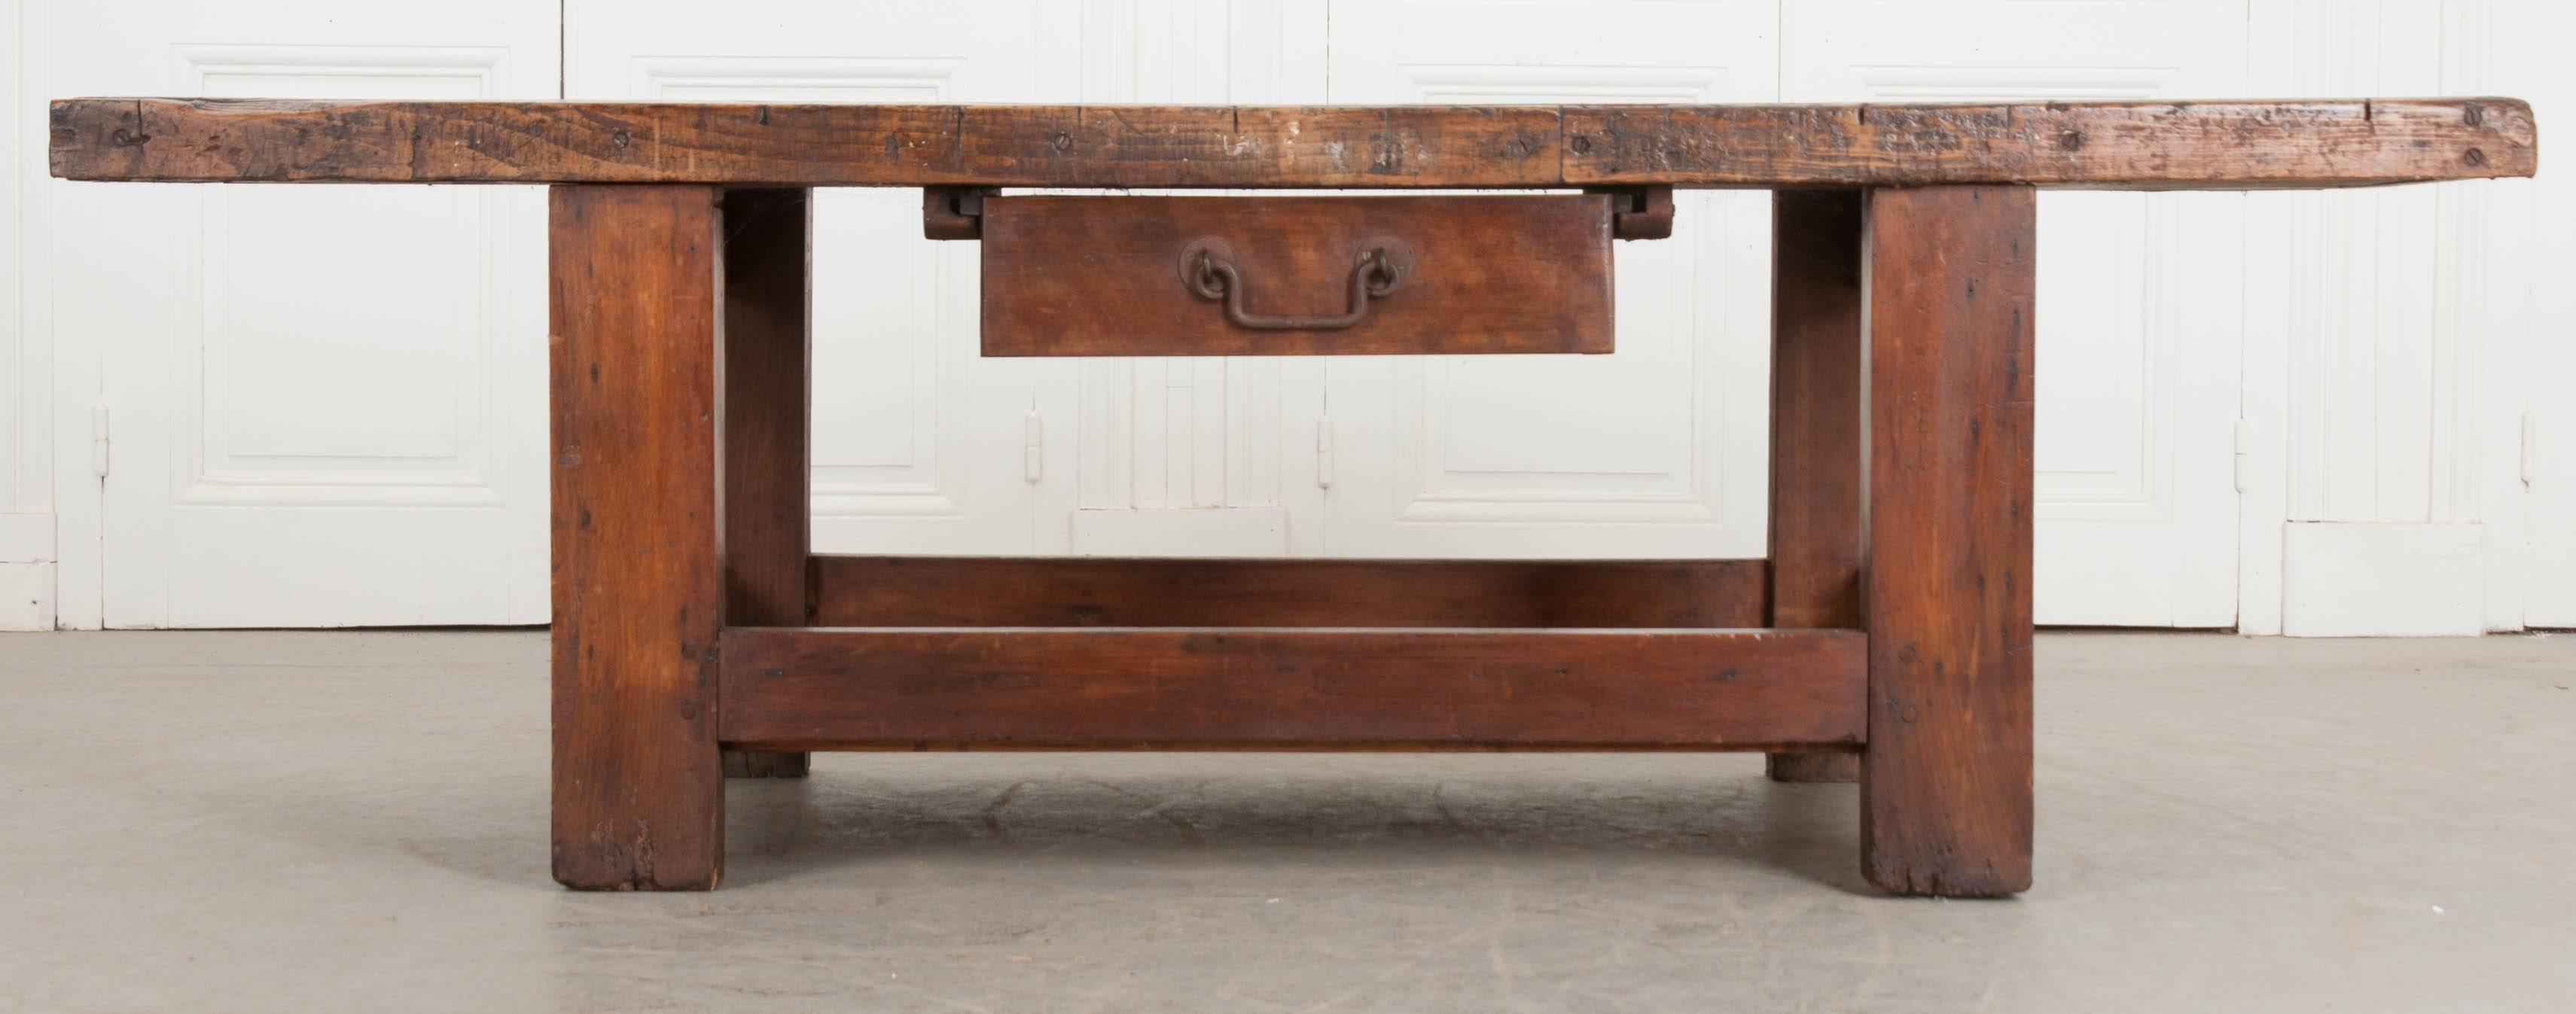 Thick, solid beechwood boards were used in the construction of this awesome 19th century French work table. The top if full of character, left by history’s craftsmen. Evidence of their work is preserved in the beechwood top. From the top hangs a